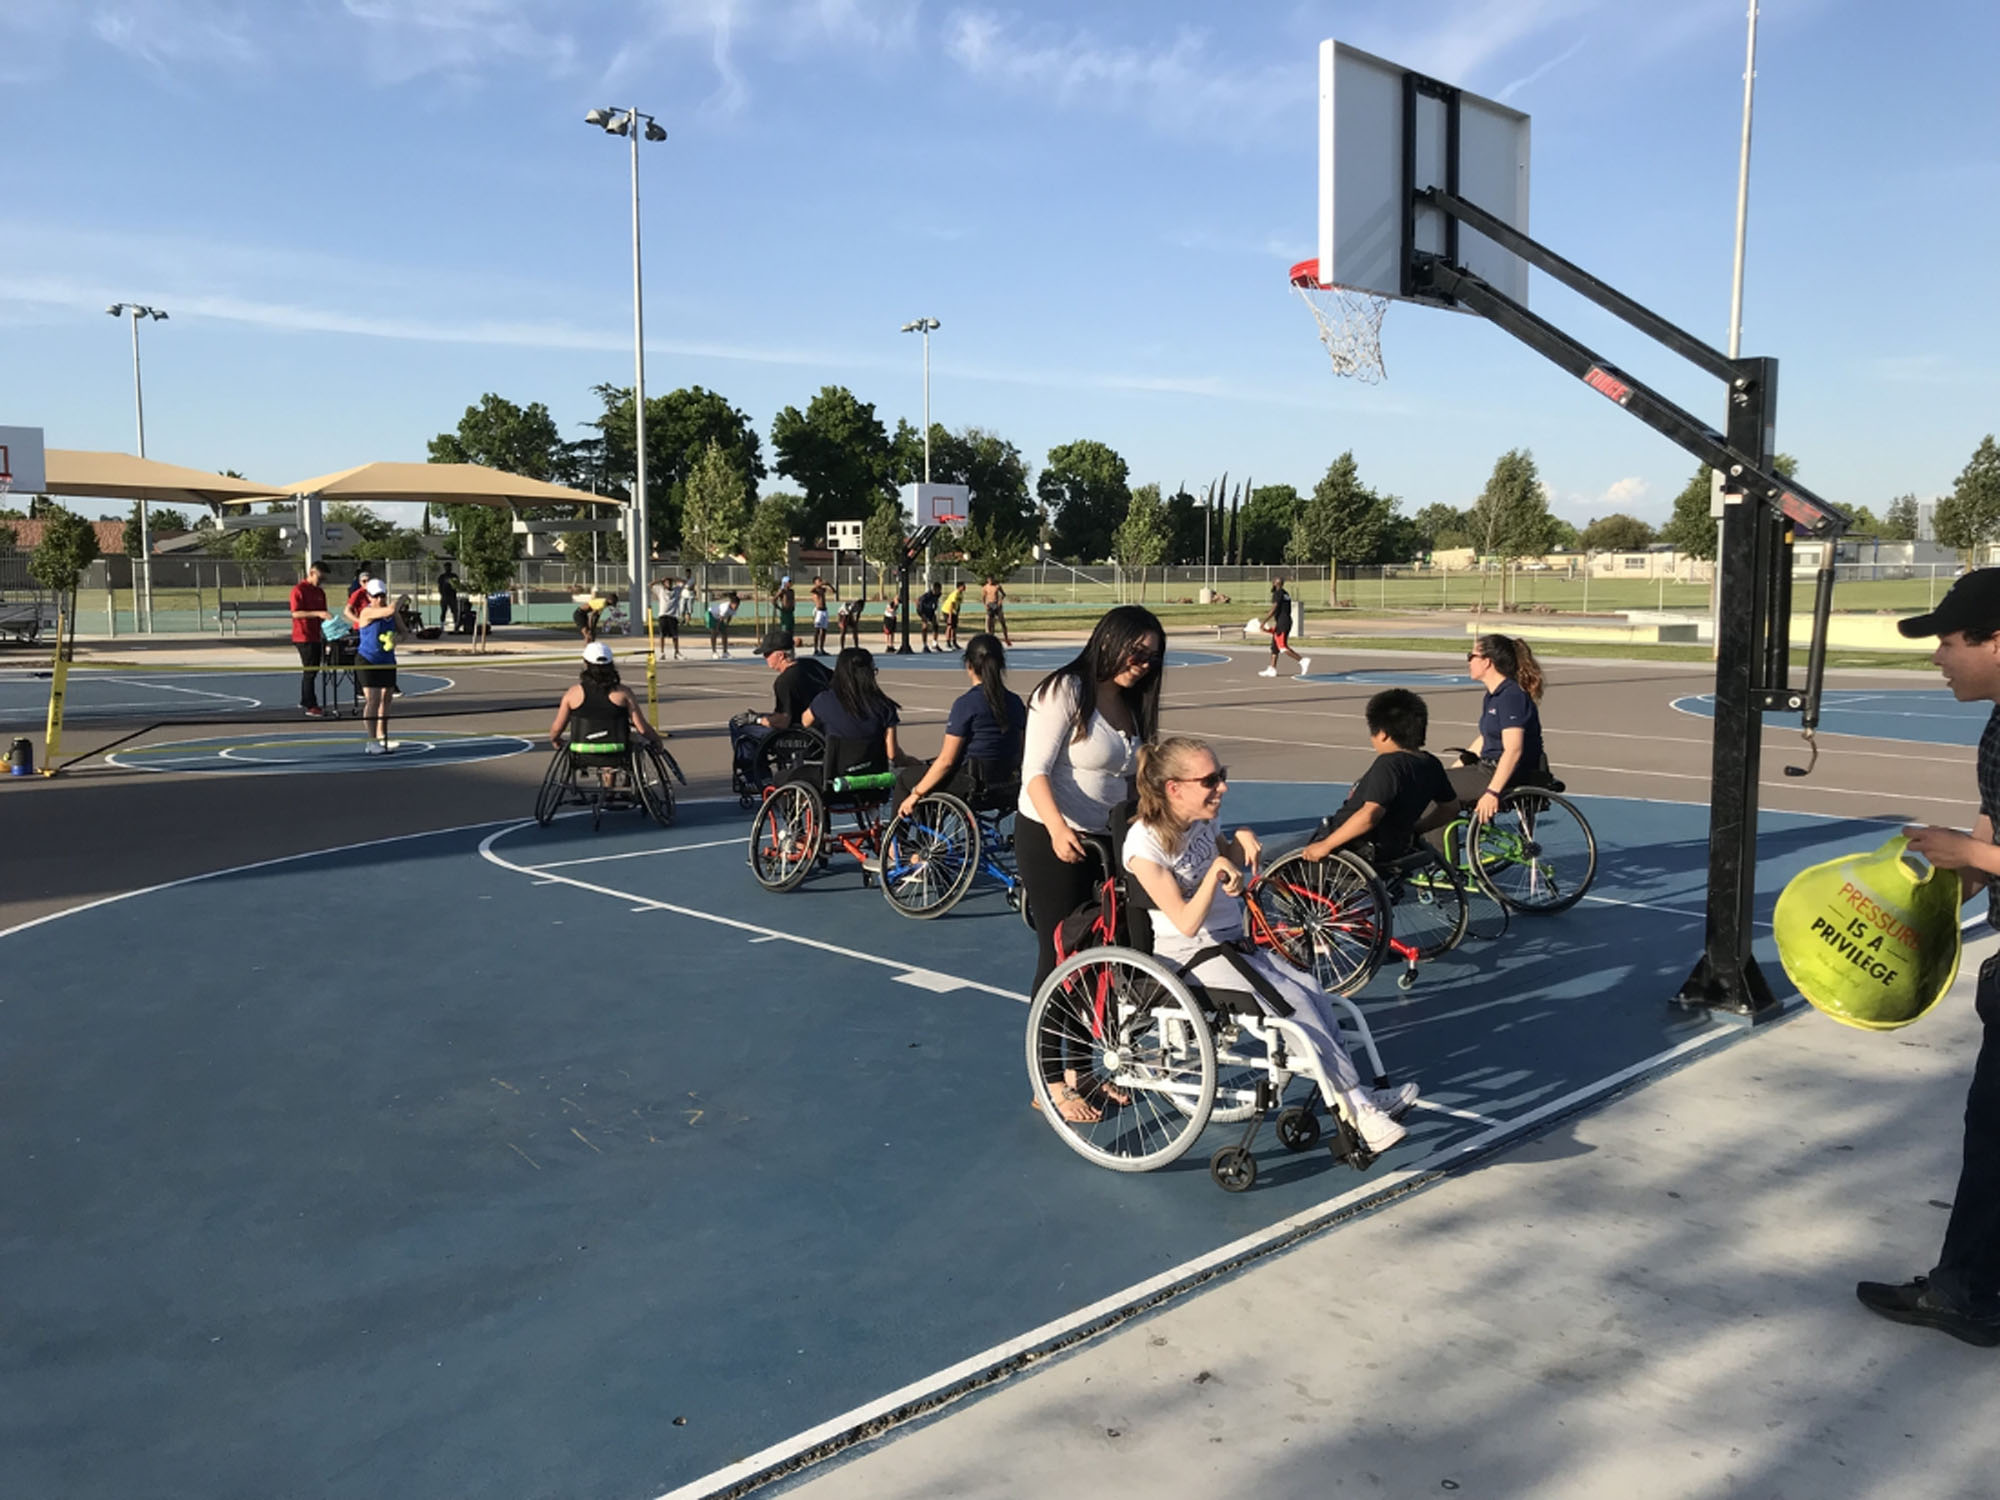 Teenagers and adults in sport wheelchairs on a basketball court at a large park